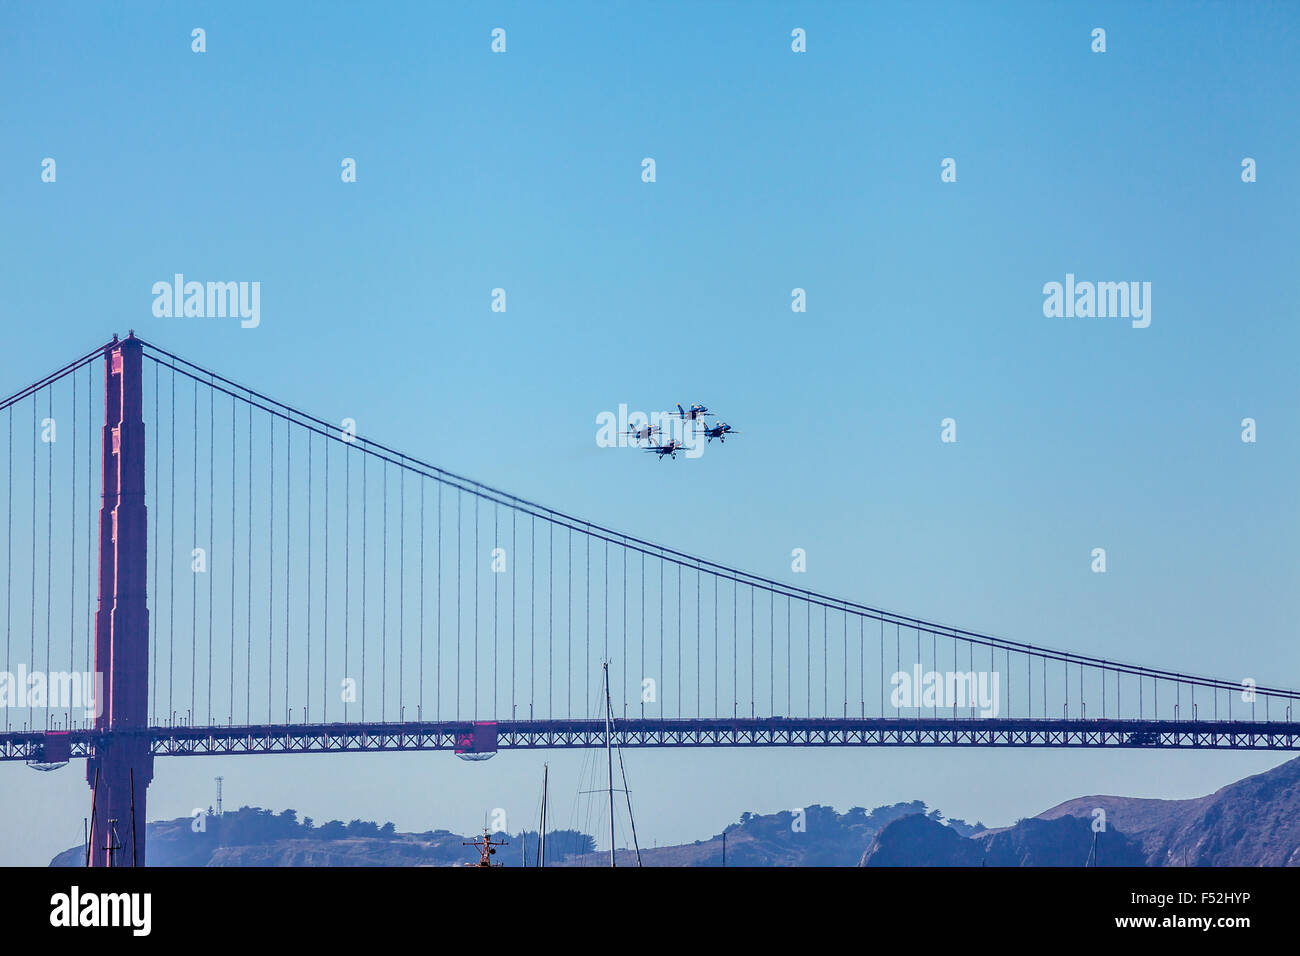 Blue Angels F/A-18 Hornet aircrafts performing flight formation over the Golden Gate Bridge, San Francisco, California, USA Stock Photo